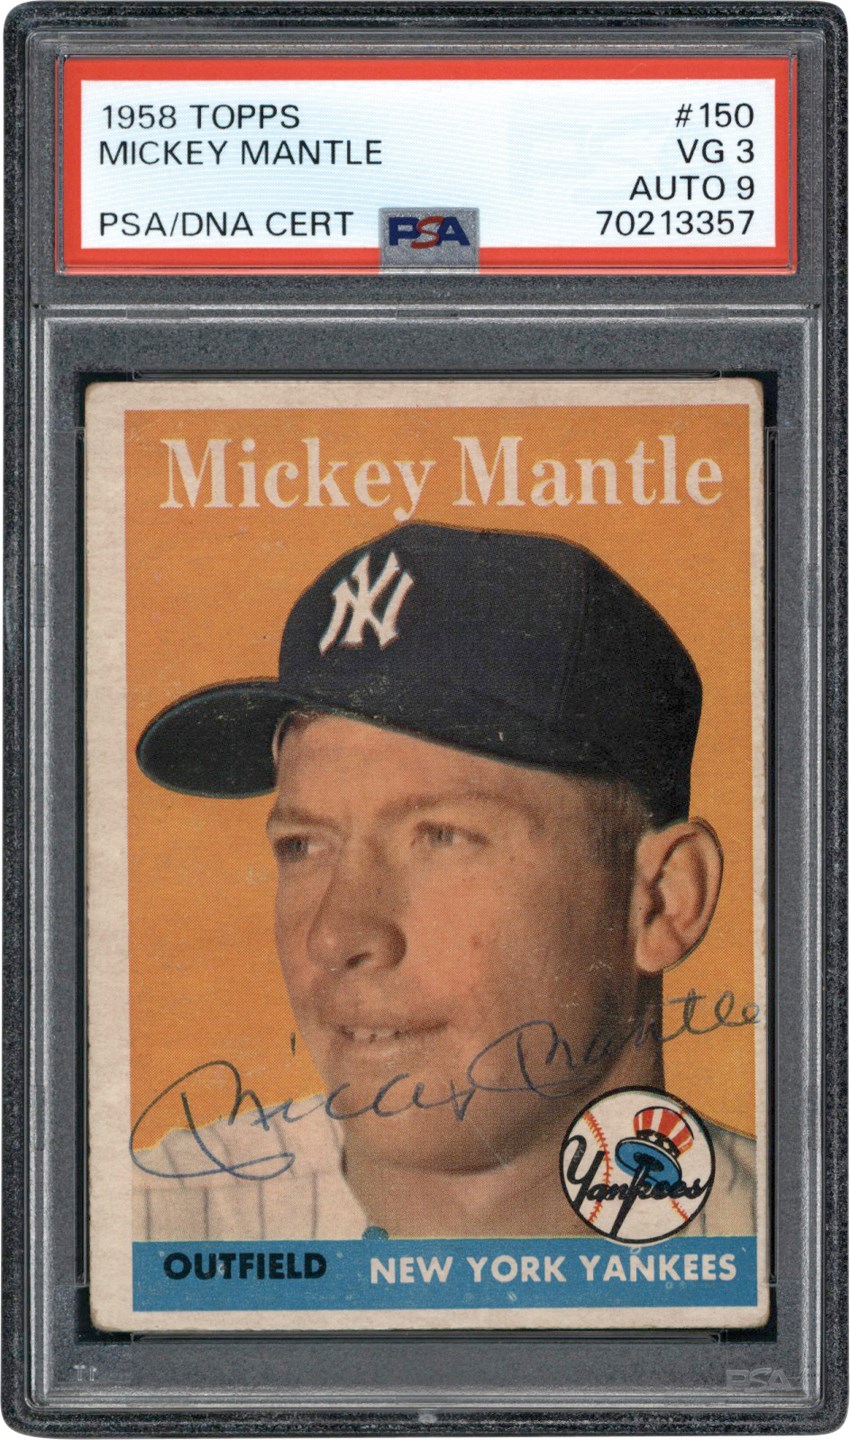 - Signed 1958 Topps #150 Mickey Mantle PSA VG 3 Auto 9